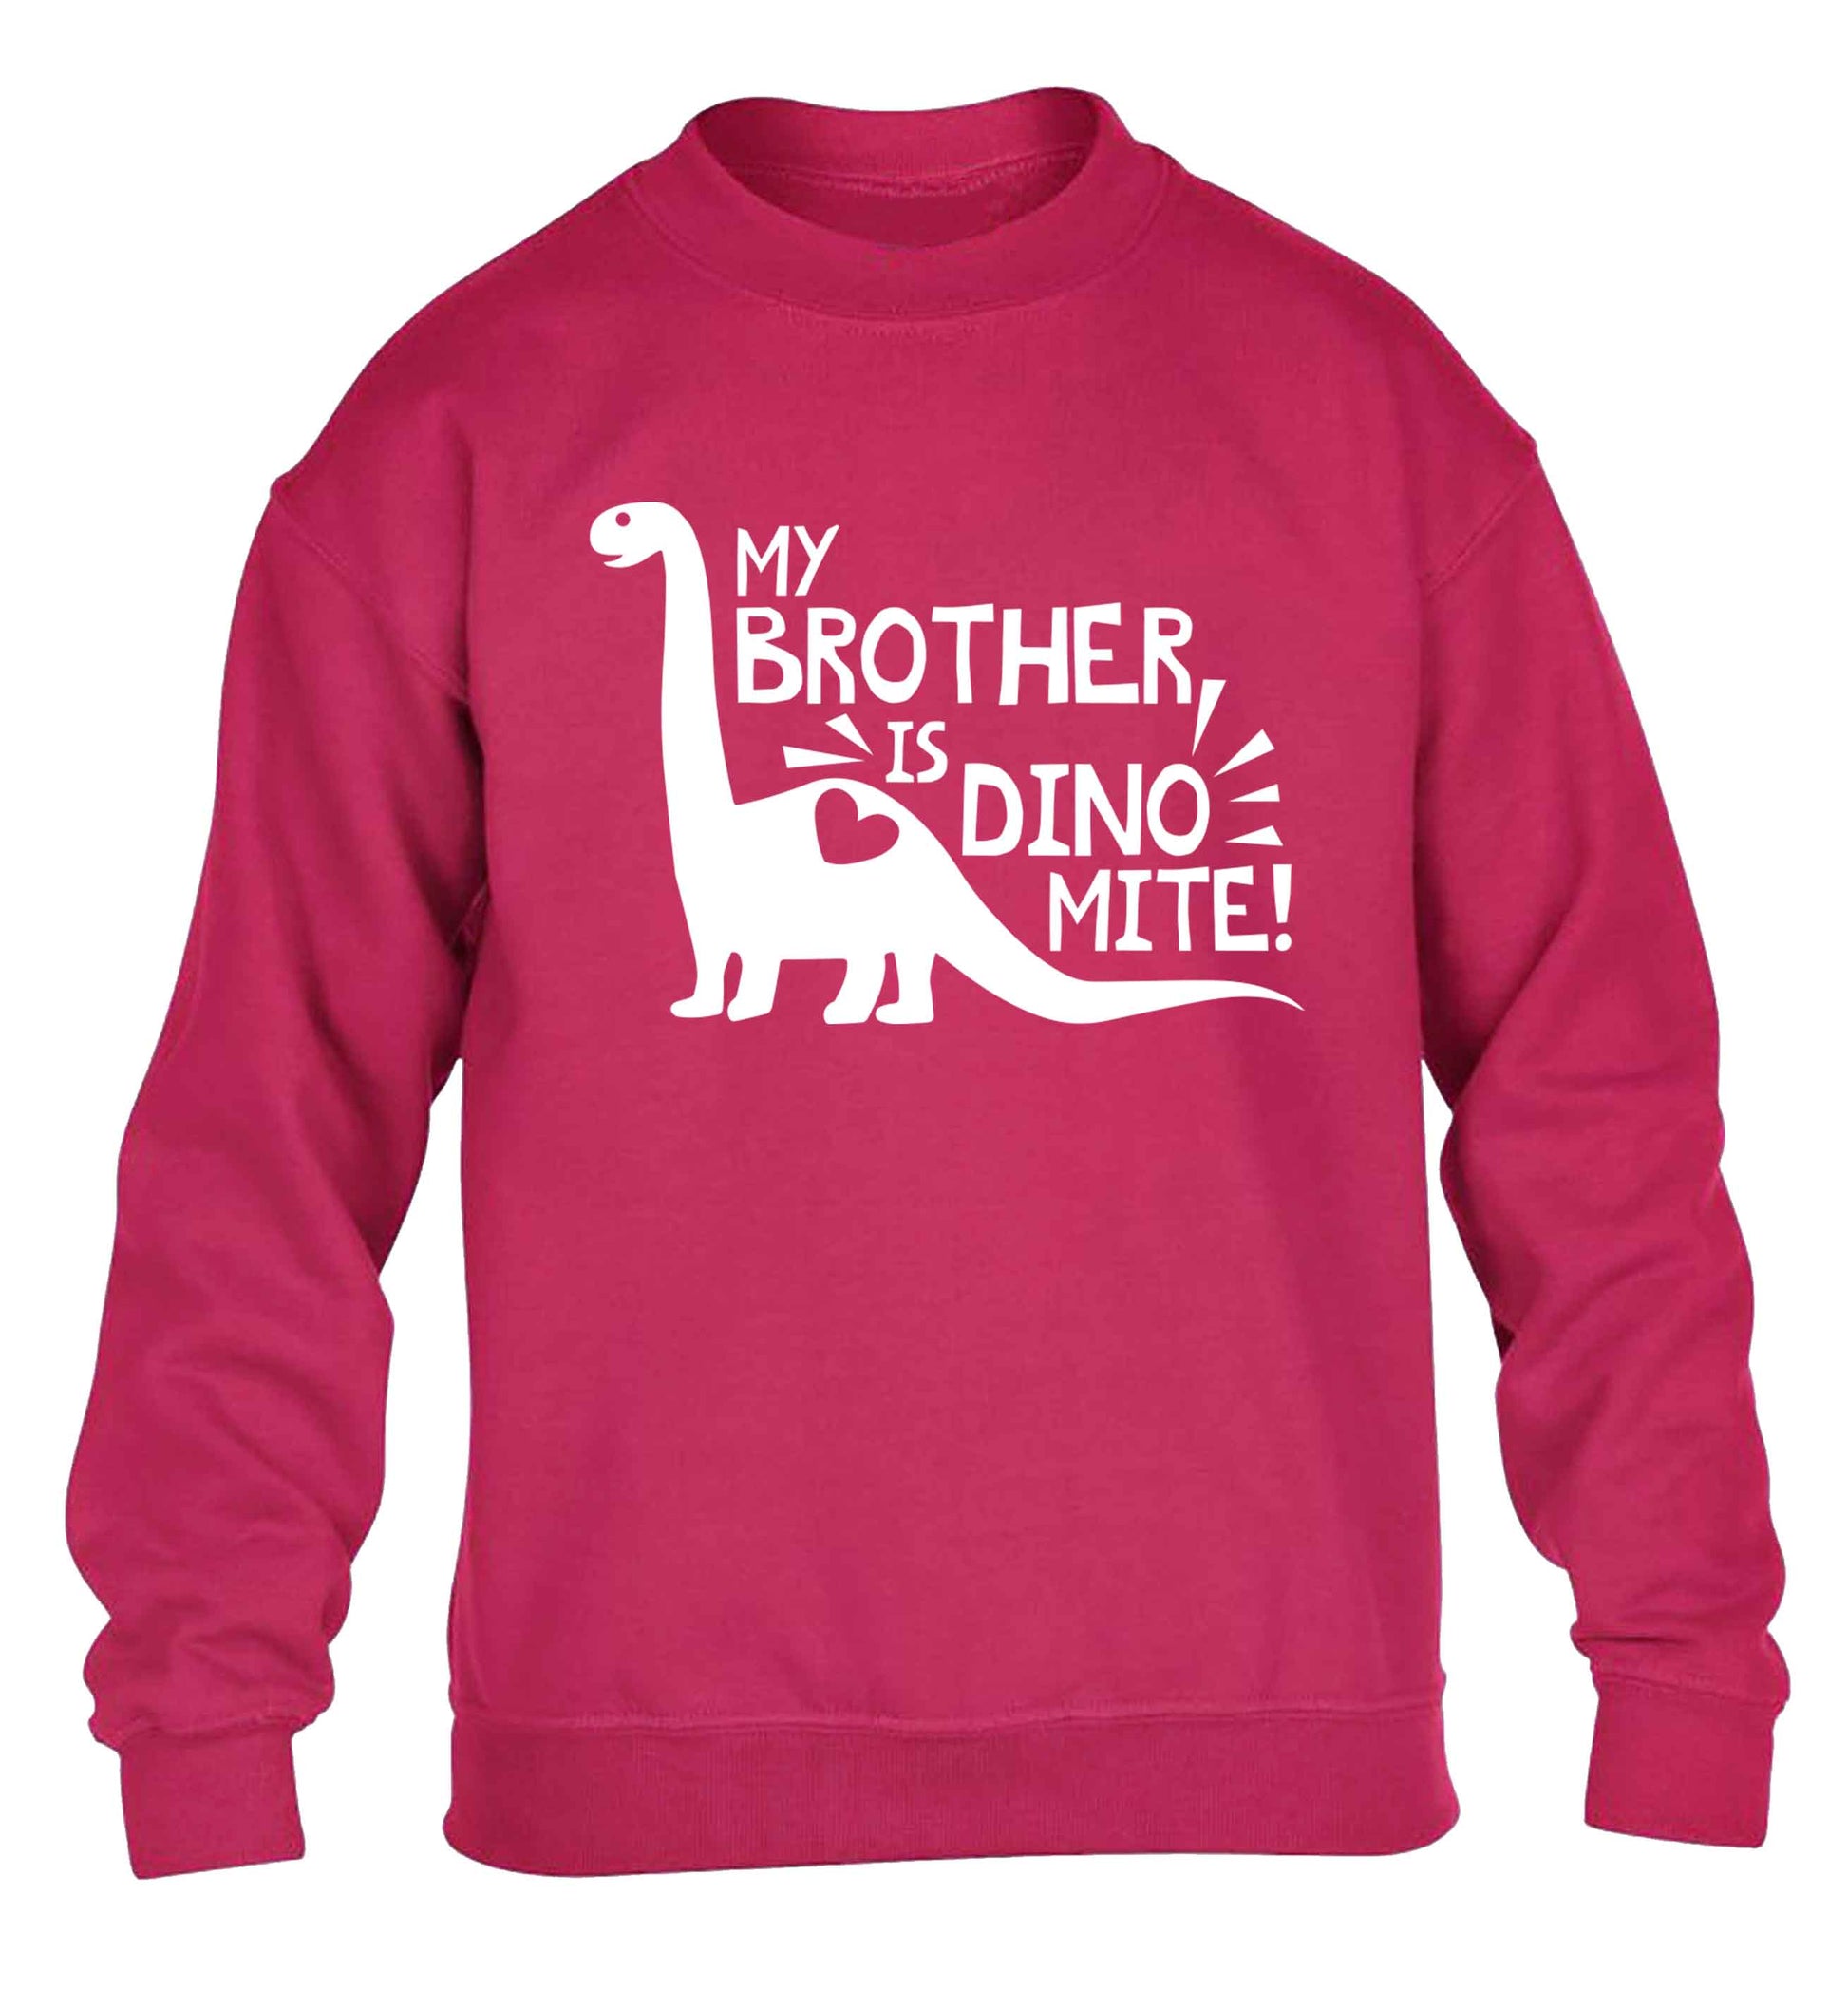 My brother is dinomite! children's pink sweater 12-13 Years